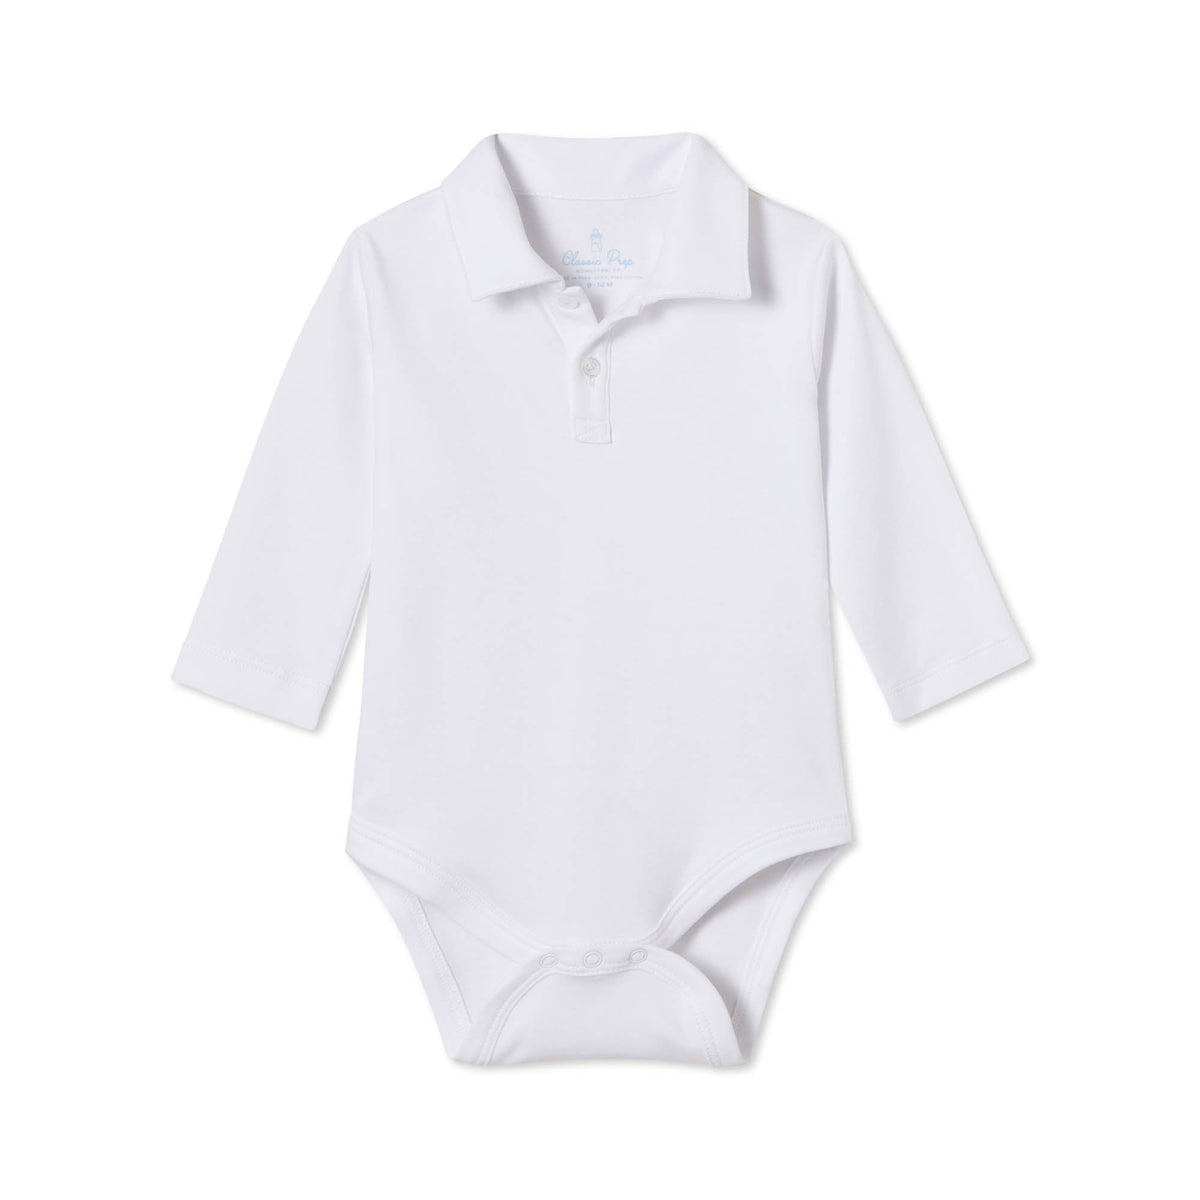 Classic and Preppy Hayes Long Sleeve Polo Onesie, Bright White-Baby Rompers-Bright White-0-3M-CPC - Classic Prep Childrenswear